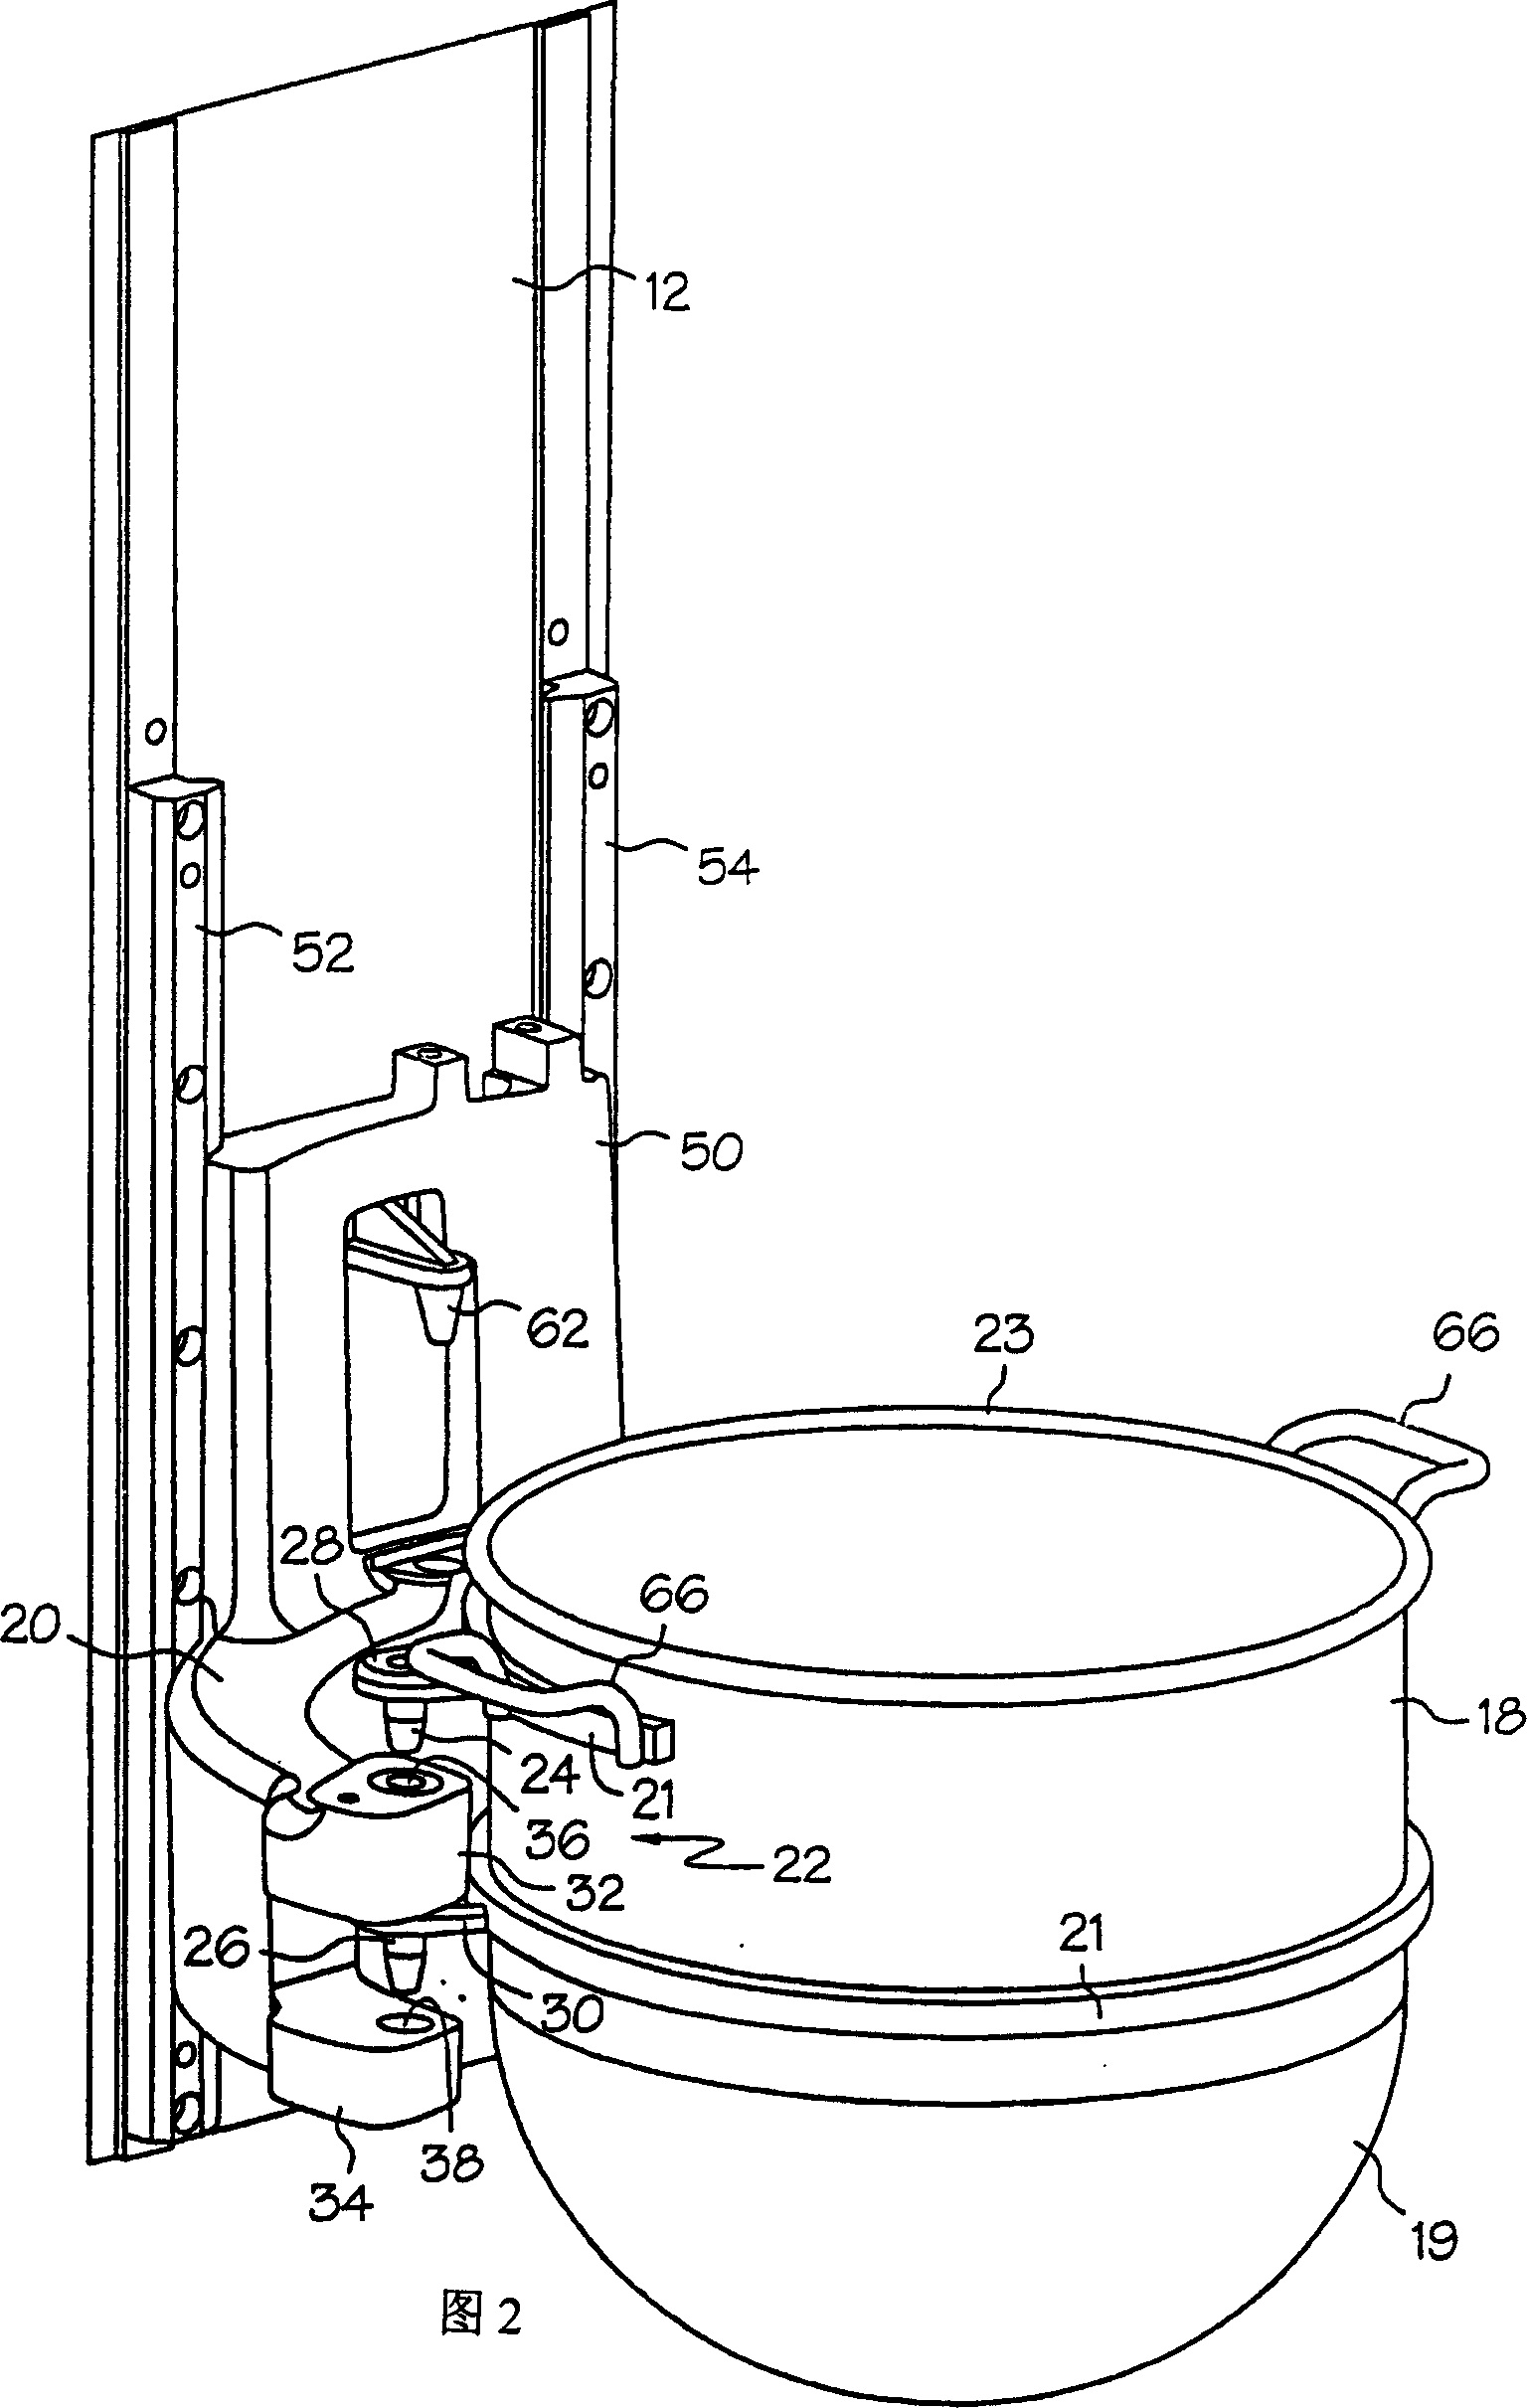 Mixer with pivotable bowl container